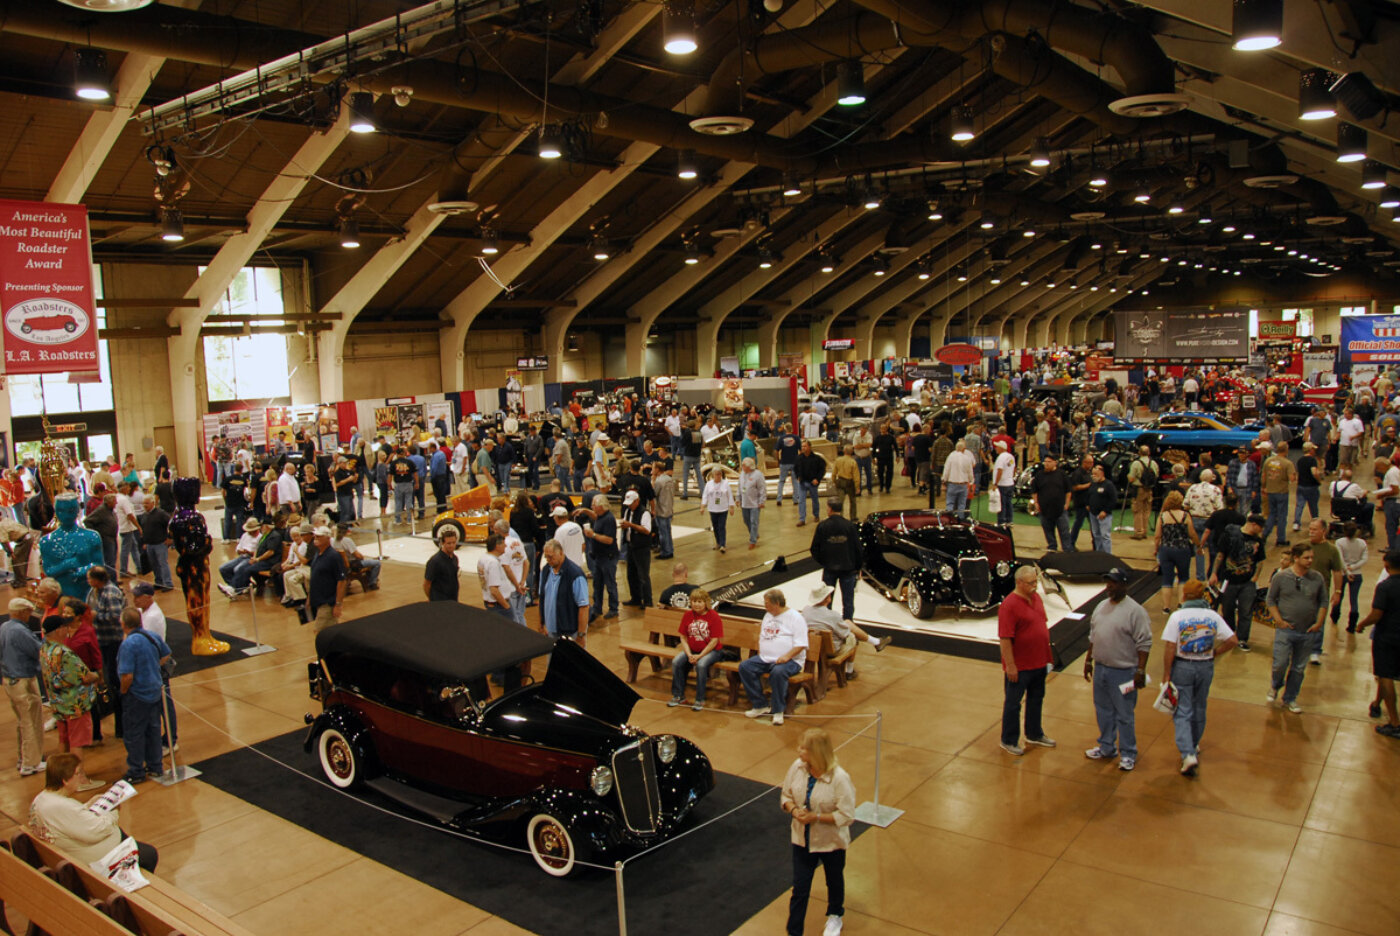 						2015 Grand National Roadster Show 1
			